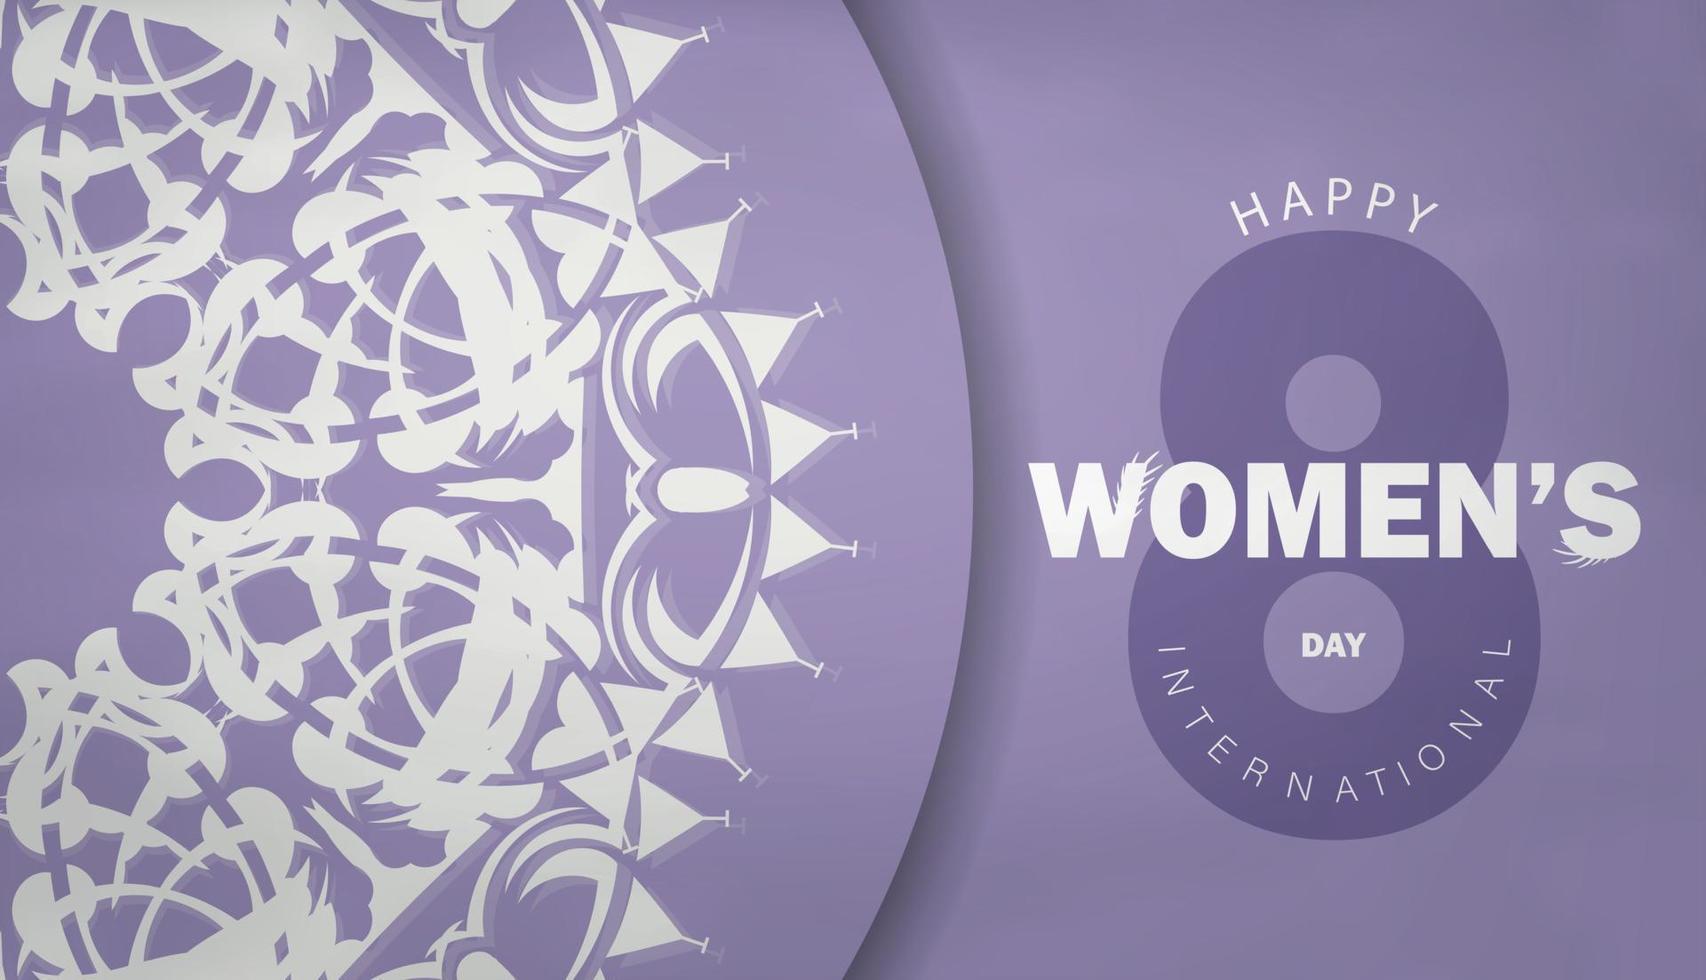 International womens day 8 march flyer template in purple color with vintage white pattern vector